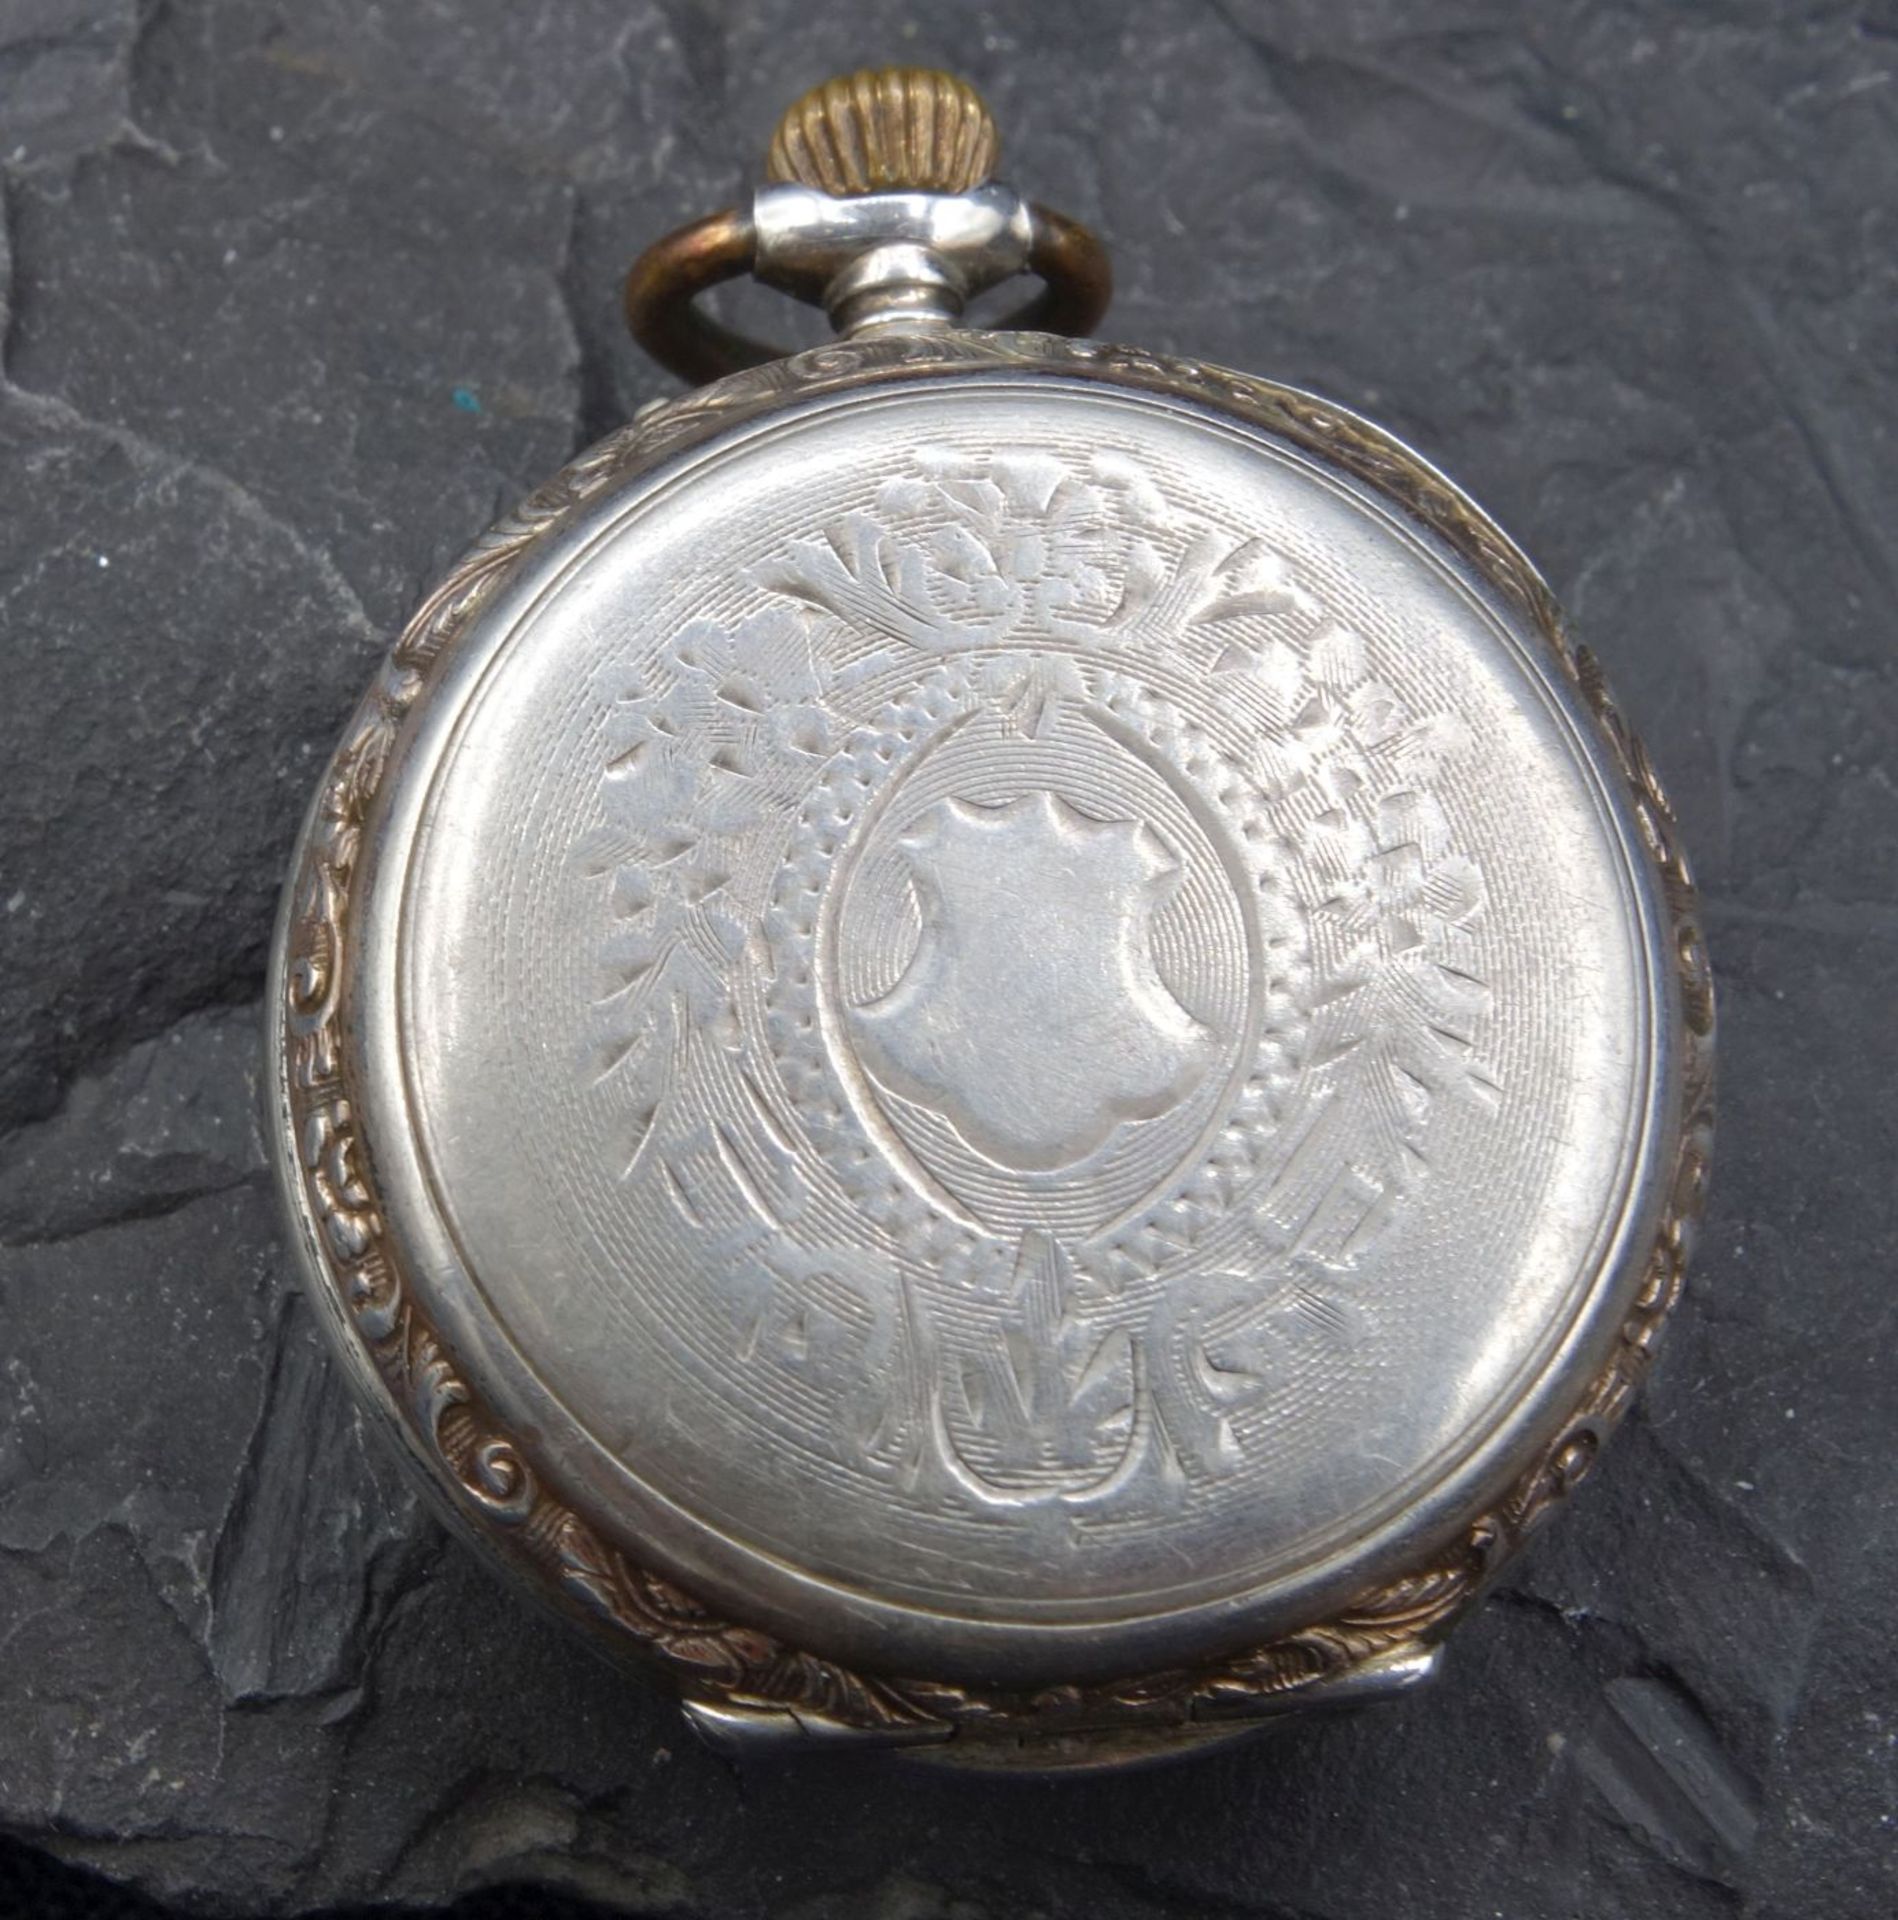 SMALL LADIES' POCKET WATCH IN GALONNÉ CASE / GALLONÉ POCKET WATCH - Image 5 of 5